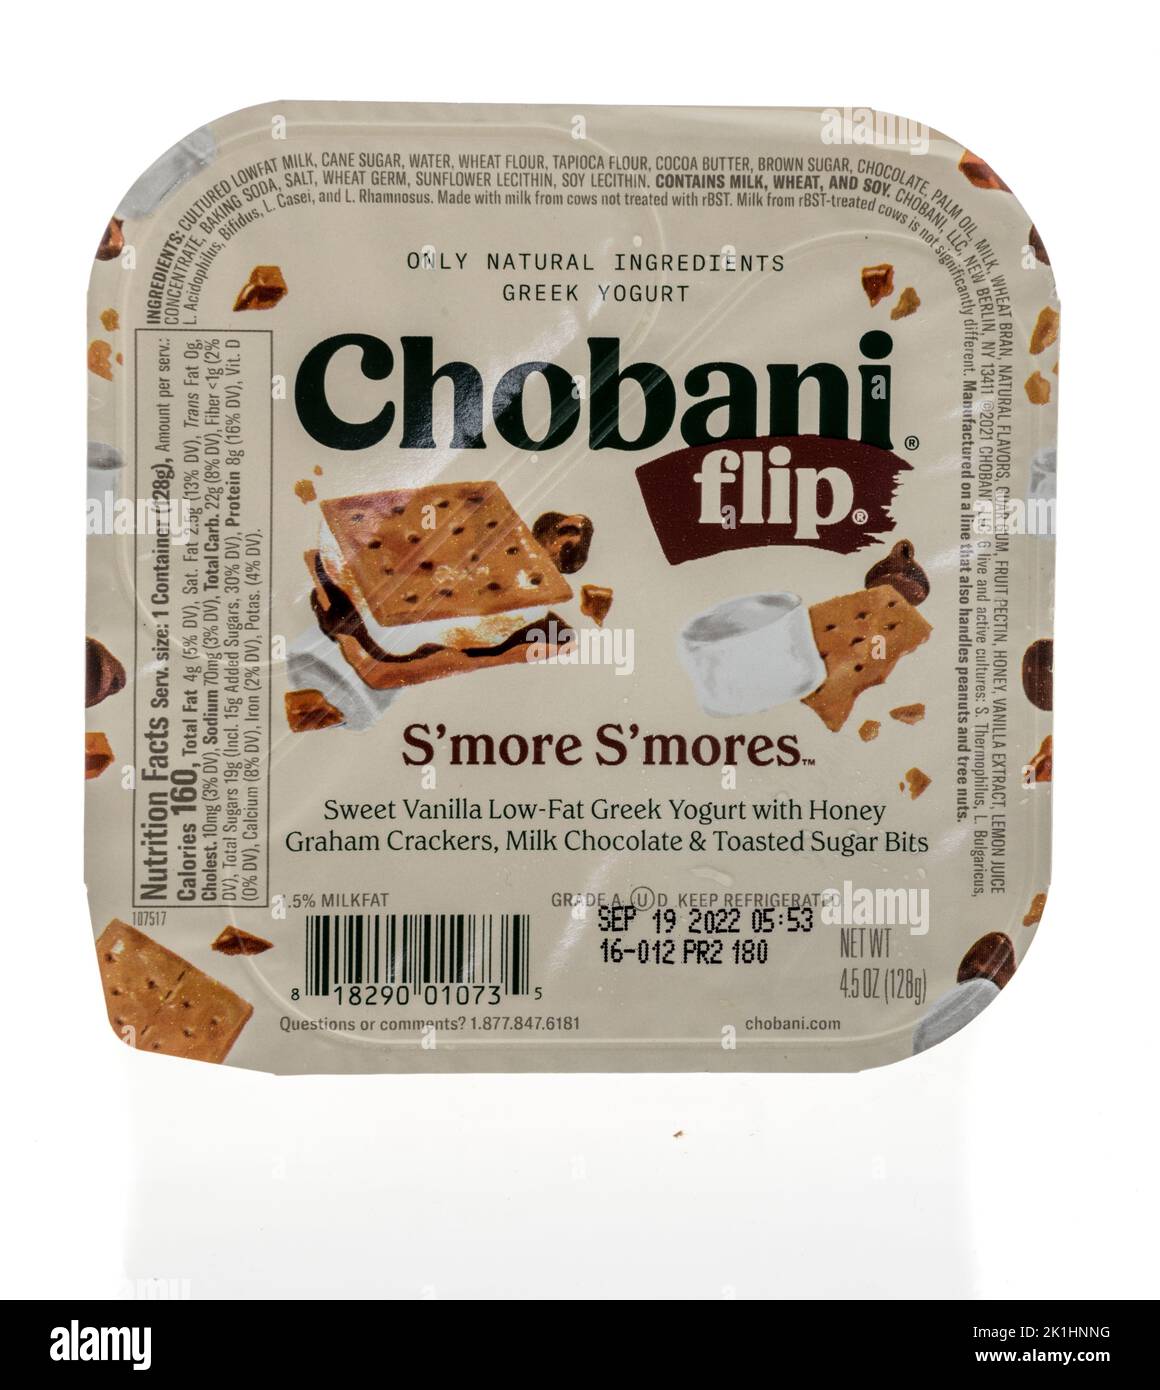 Winneconne, WI - 18 September 2022: A package of Chobani flip smores smores greek yogurt on an isolated background. Stock Photo